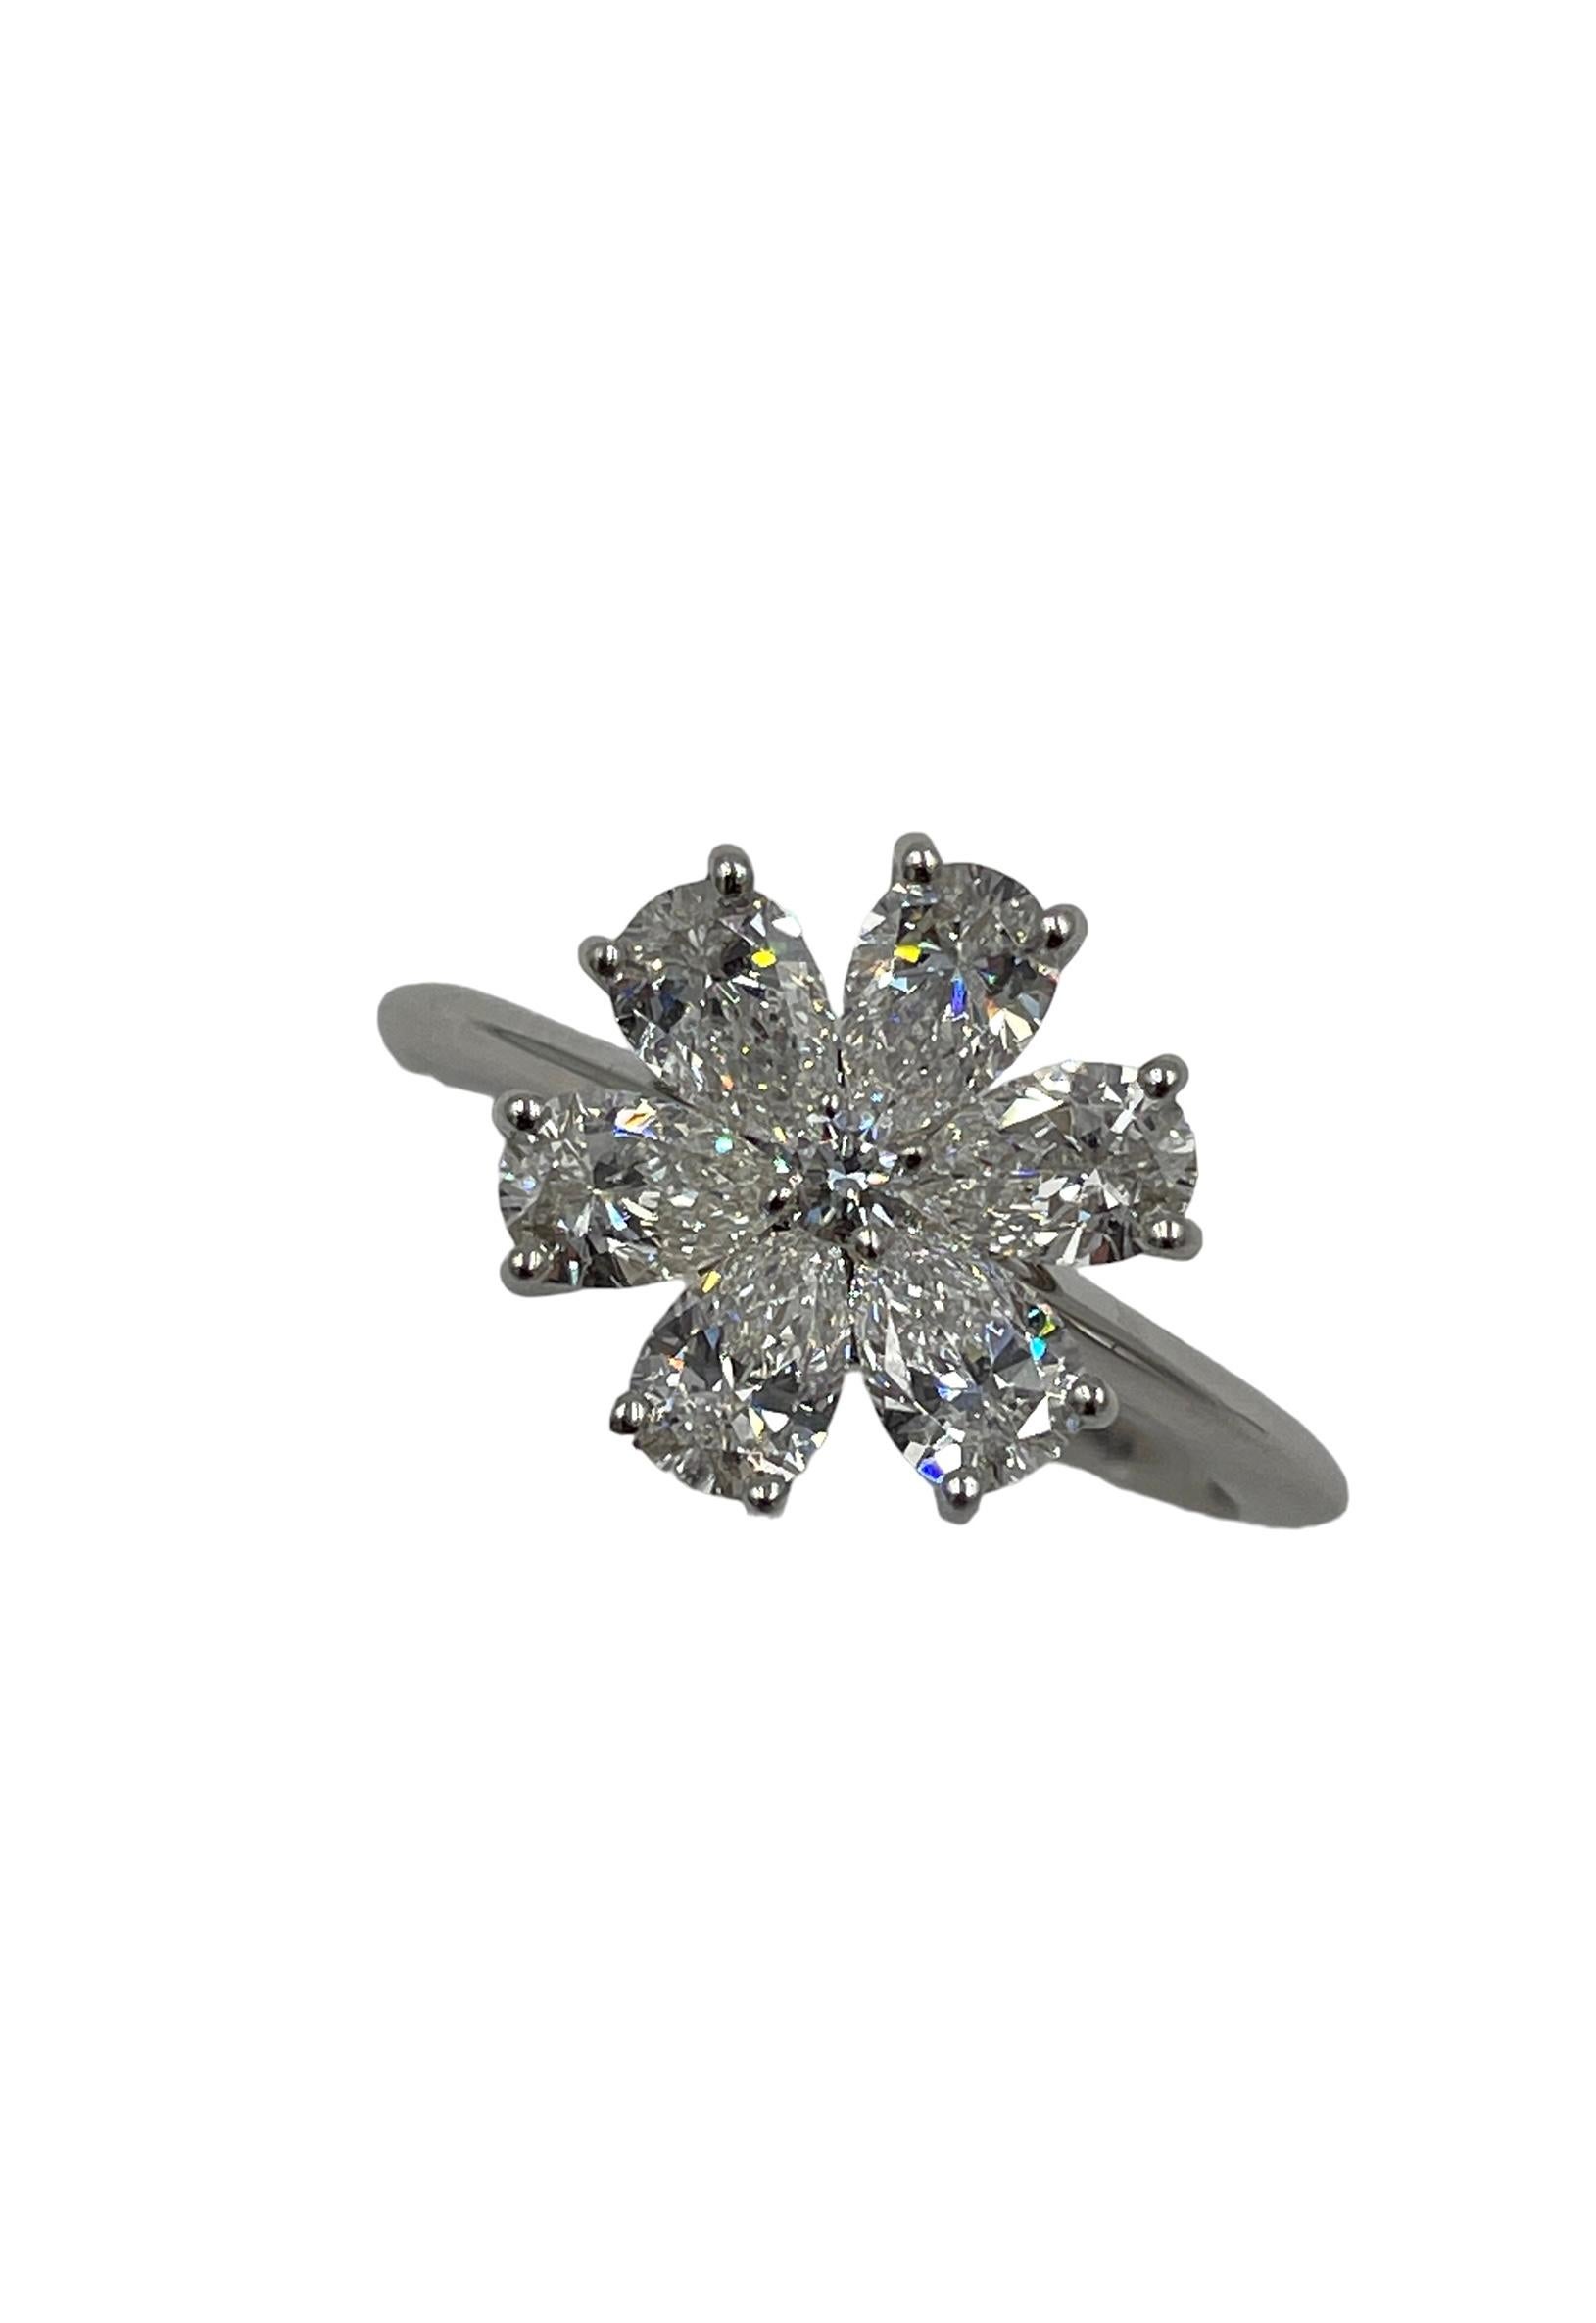 Harry Winston diamond platinum ring.  This is the Forget-Me-Knot diamond cluster ring.  Set with 6 pear-shaped and 1 round brilliant diamond, weighing a total of approximately 1.66 carats (approximately VVS-VS clarity, F-G color), set in